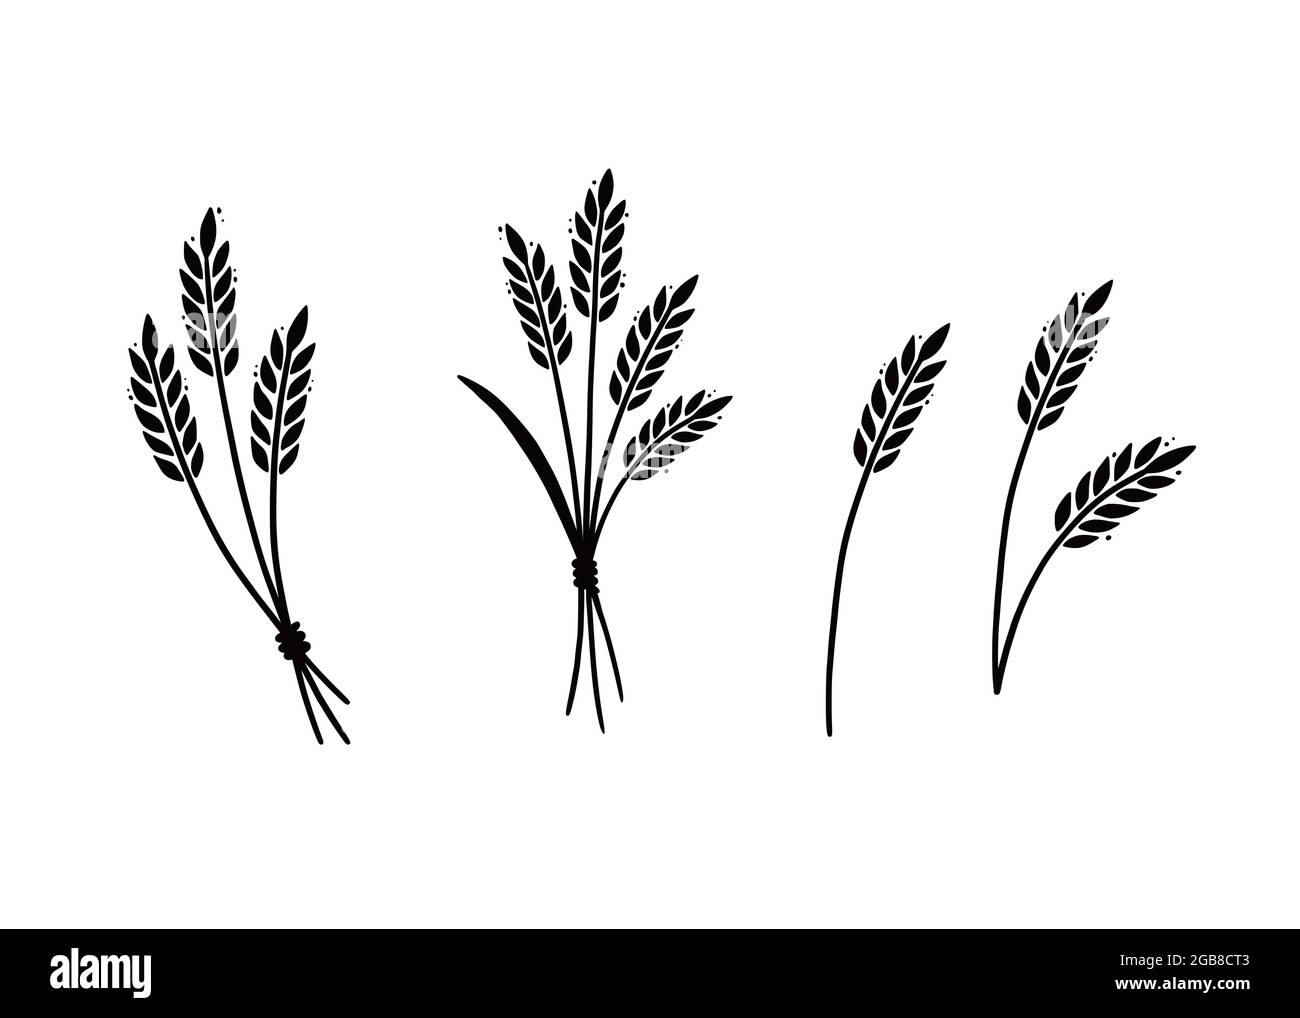 Lineart Hd Transparent, Lineart Sketch Wheat, Wheat Drawing, Wheat Sketch,  Line Draft PNG Image For Free Download